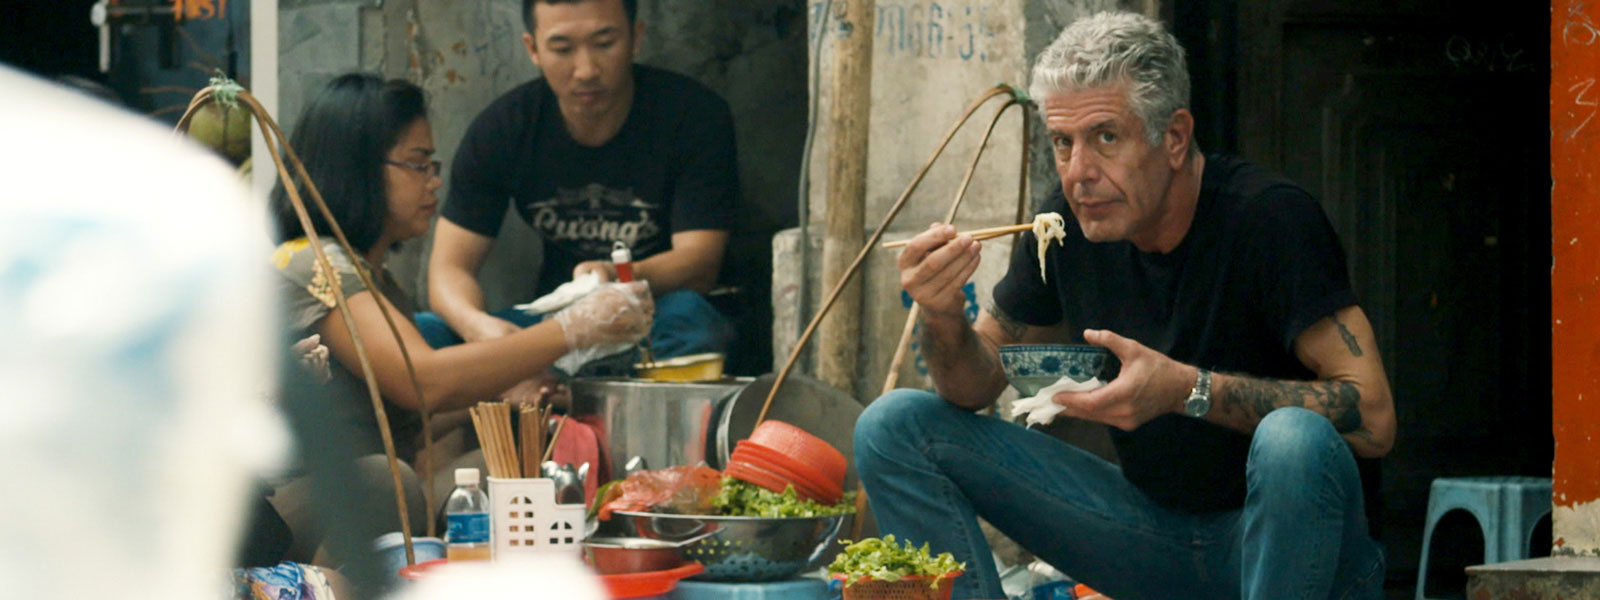 Image from 'Roadrunner: A Film About Anthony Bourdain'